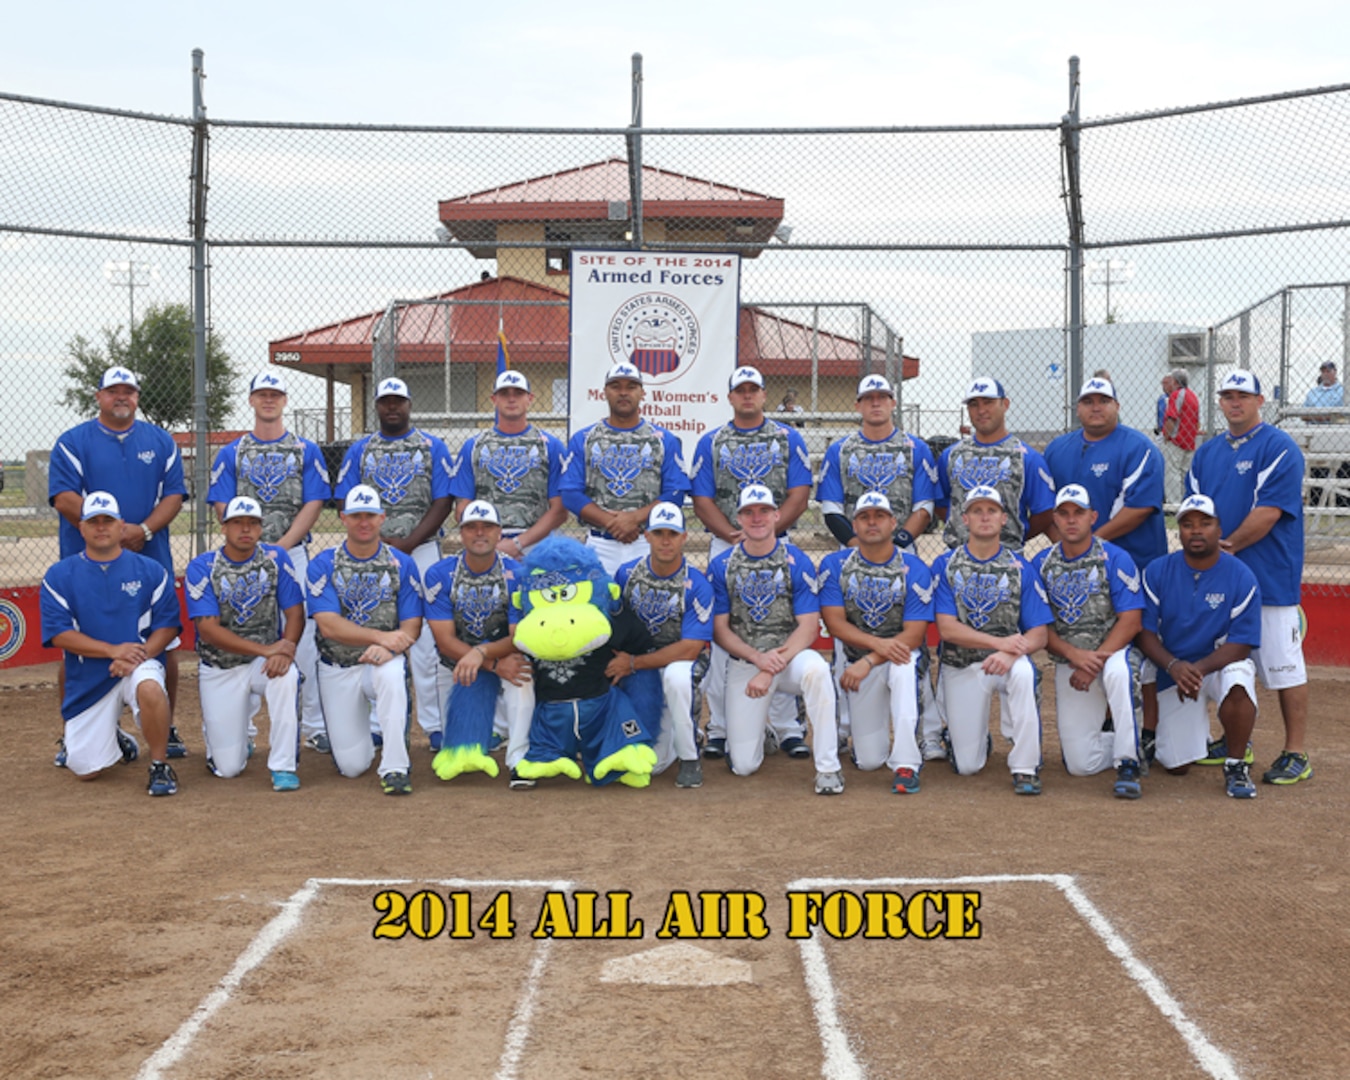 All Air Force Mens Softball Team at the 2014 Armed Forces Softball Championship at Fort Sill, Okla. 14-19 September.